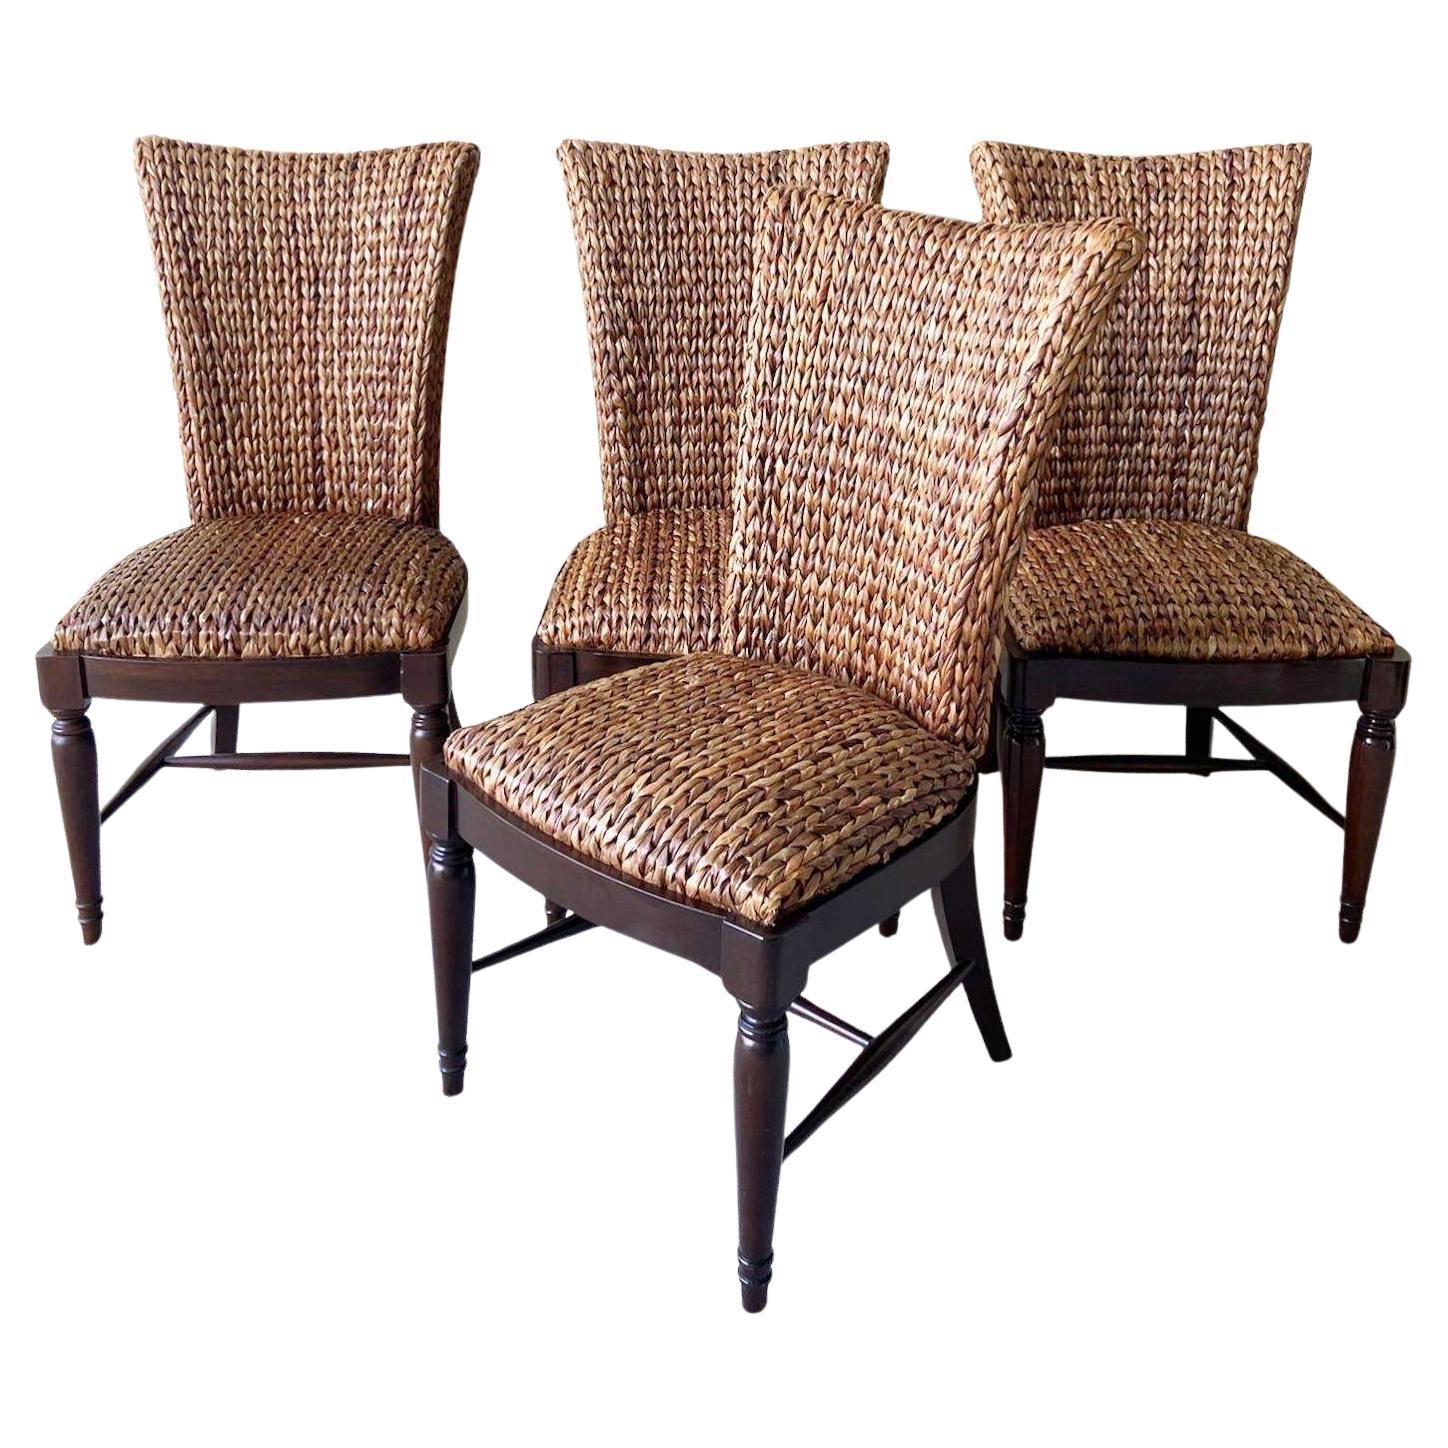 Boho Chic Woven Sea Grass Dining Chairs - Set of 4 For Sale